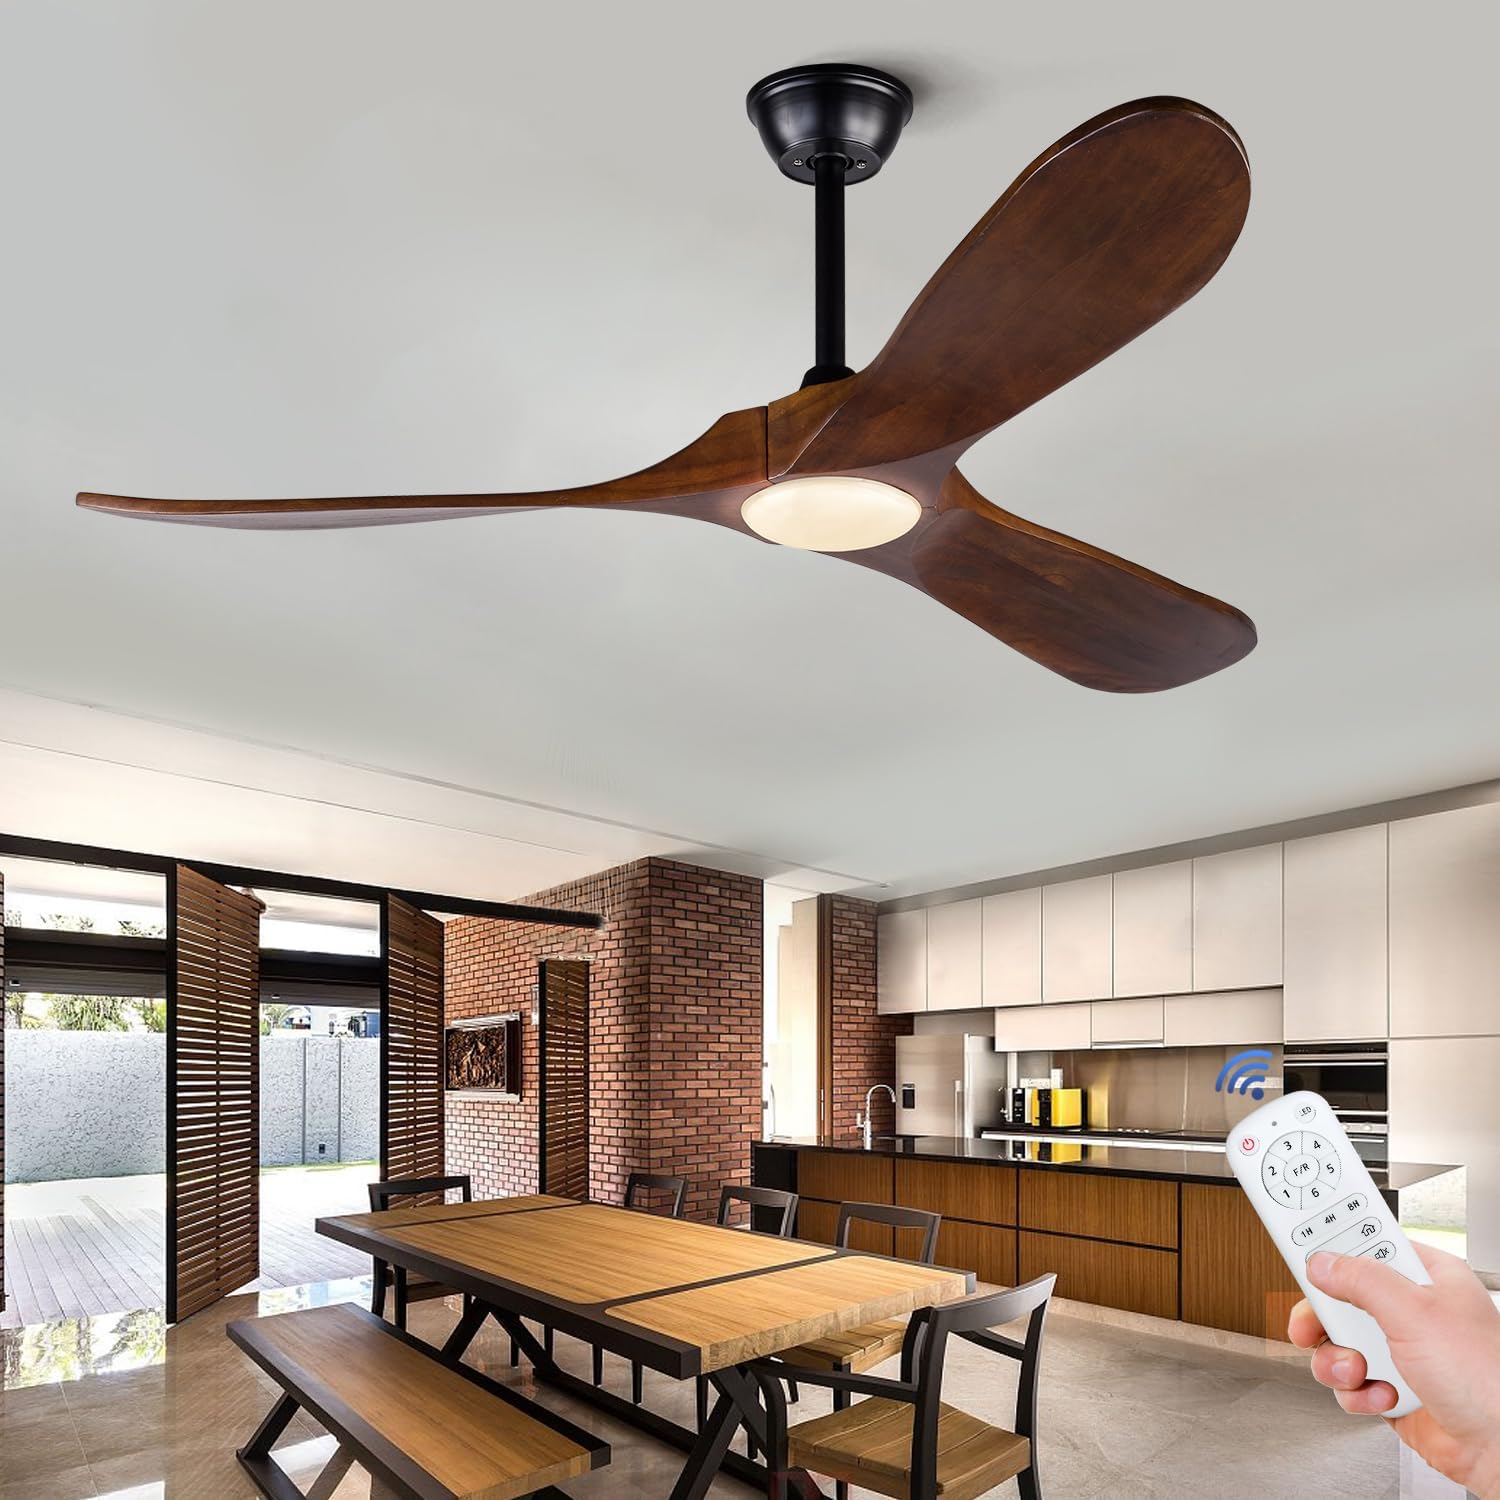 BOJUE 52 Indoor Outdoor 3 Wooden Blades Remote Control with Light Modern Ceiling Fan for Terrace Living Room Bedroom (Deep Walnut Blades)